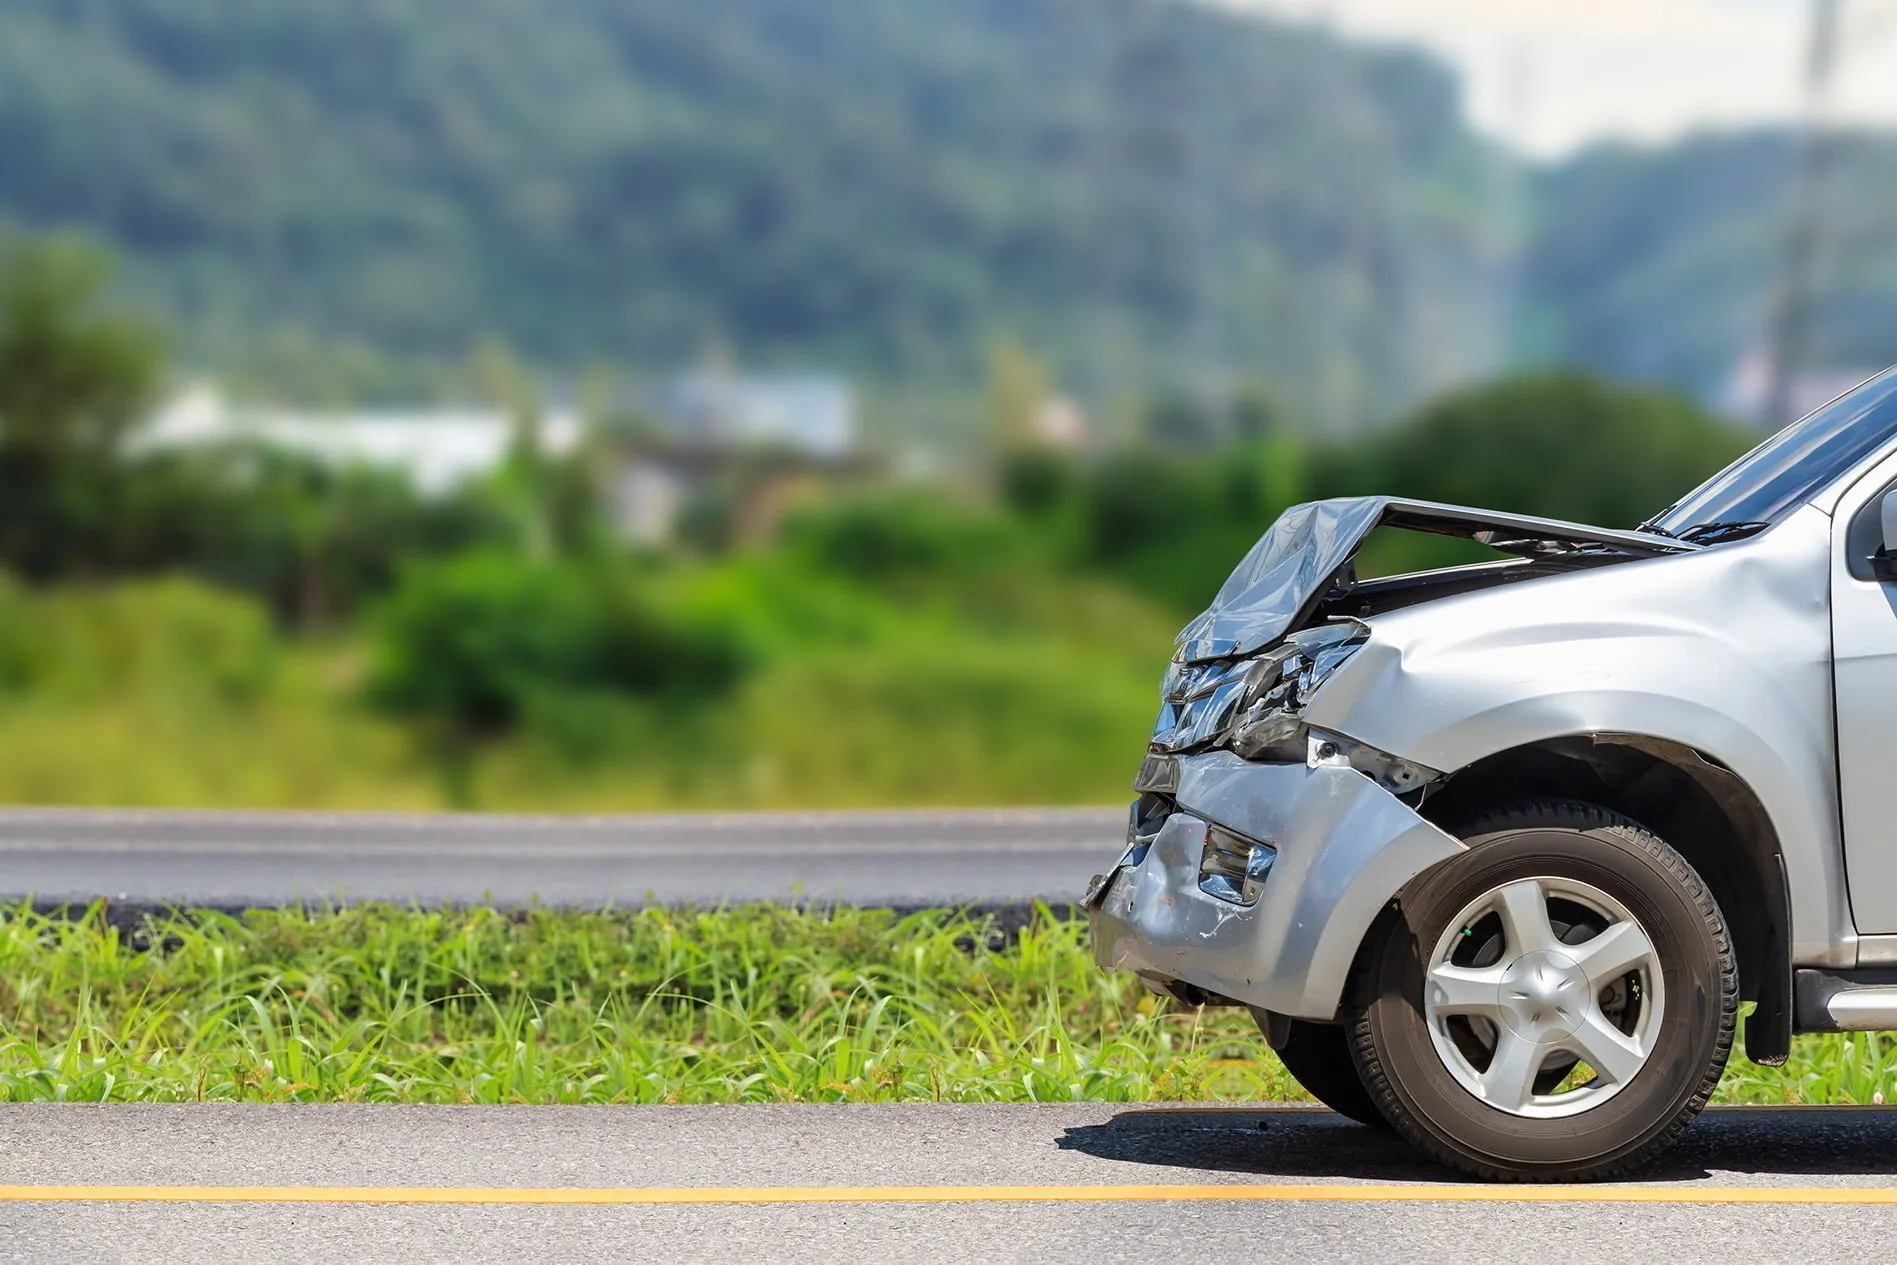 Crushed front bumper of car after a car accident. Contact our car accident lawyers today to learn how our car accident lawyers can help you recover damages from a car accident in Jackson or Casper Wyoming.